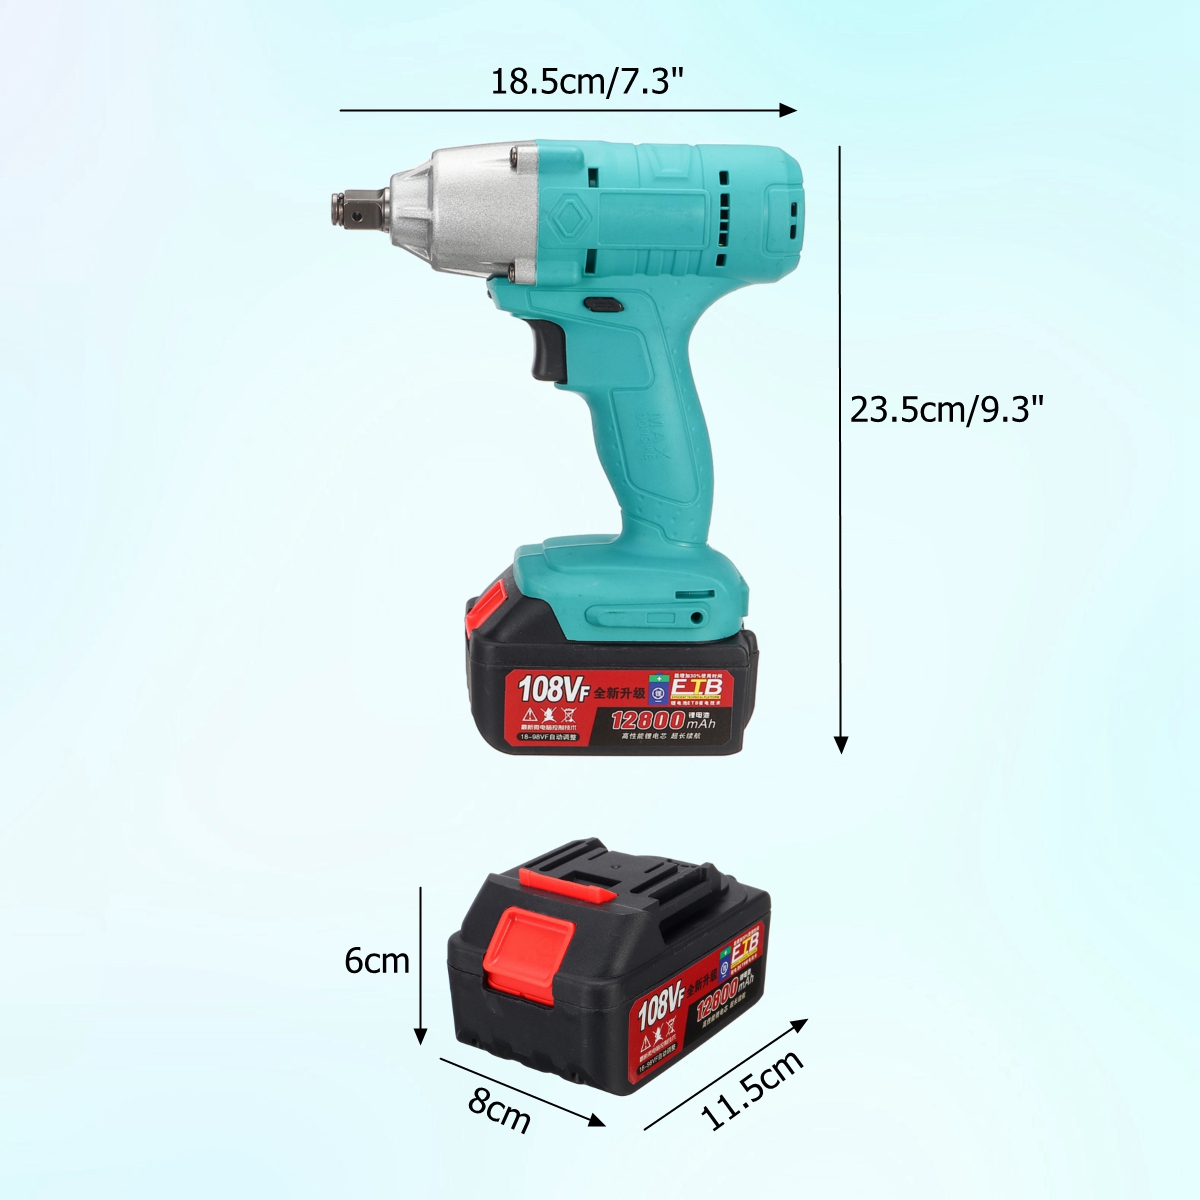 108VF-12800mAh-Lithium-Ion-Battery-Electric-Cordless-Impact-Wrench-Drill-Driver-Kit-1466581-9